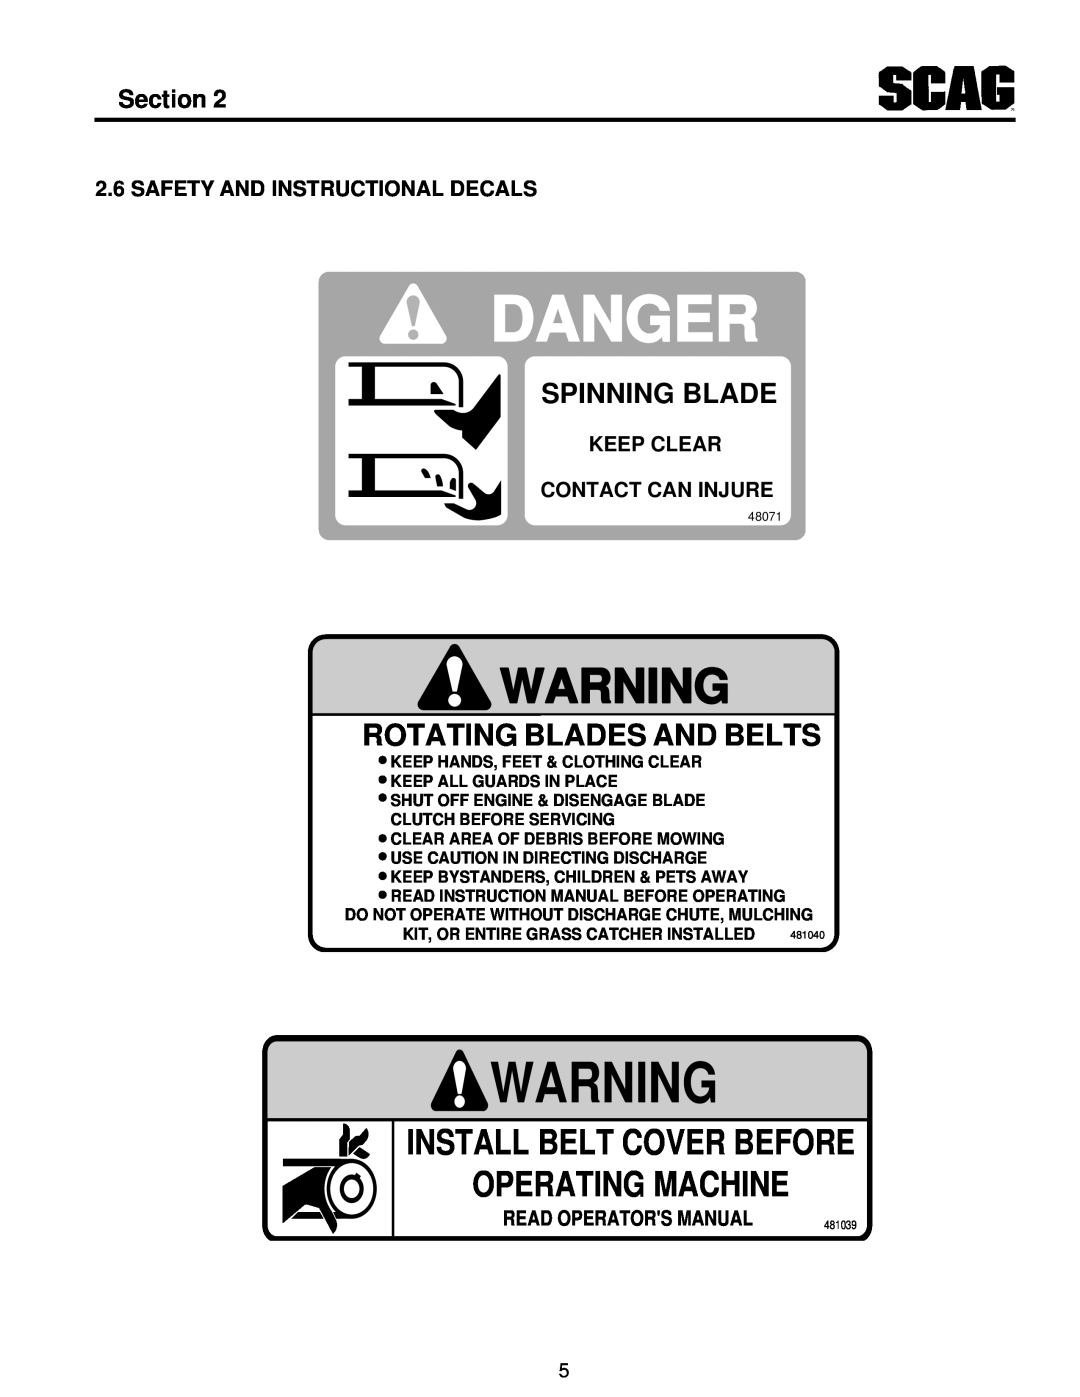 Scag Power Equipment MAG Safety And Instructional Decals, Keep Clear Contact Can Injure, Danger, Rotating Blades And Belts 